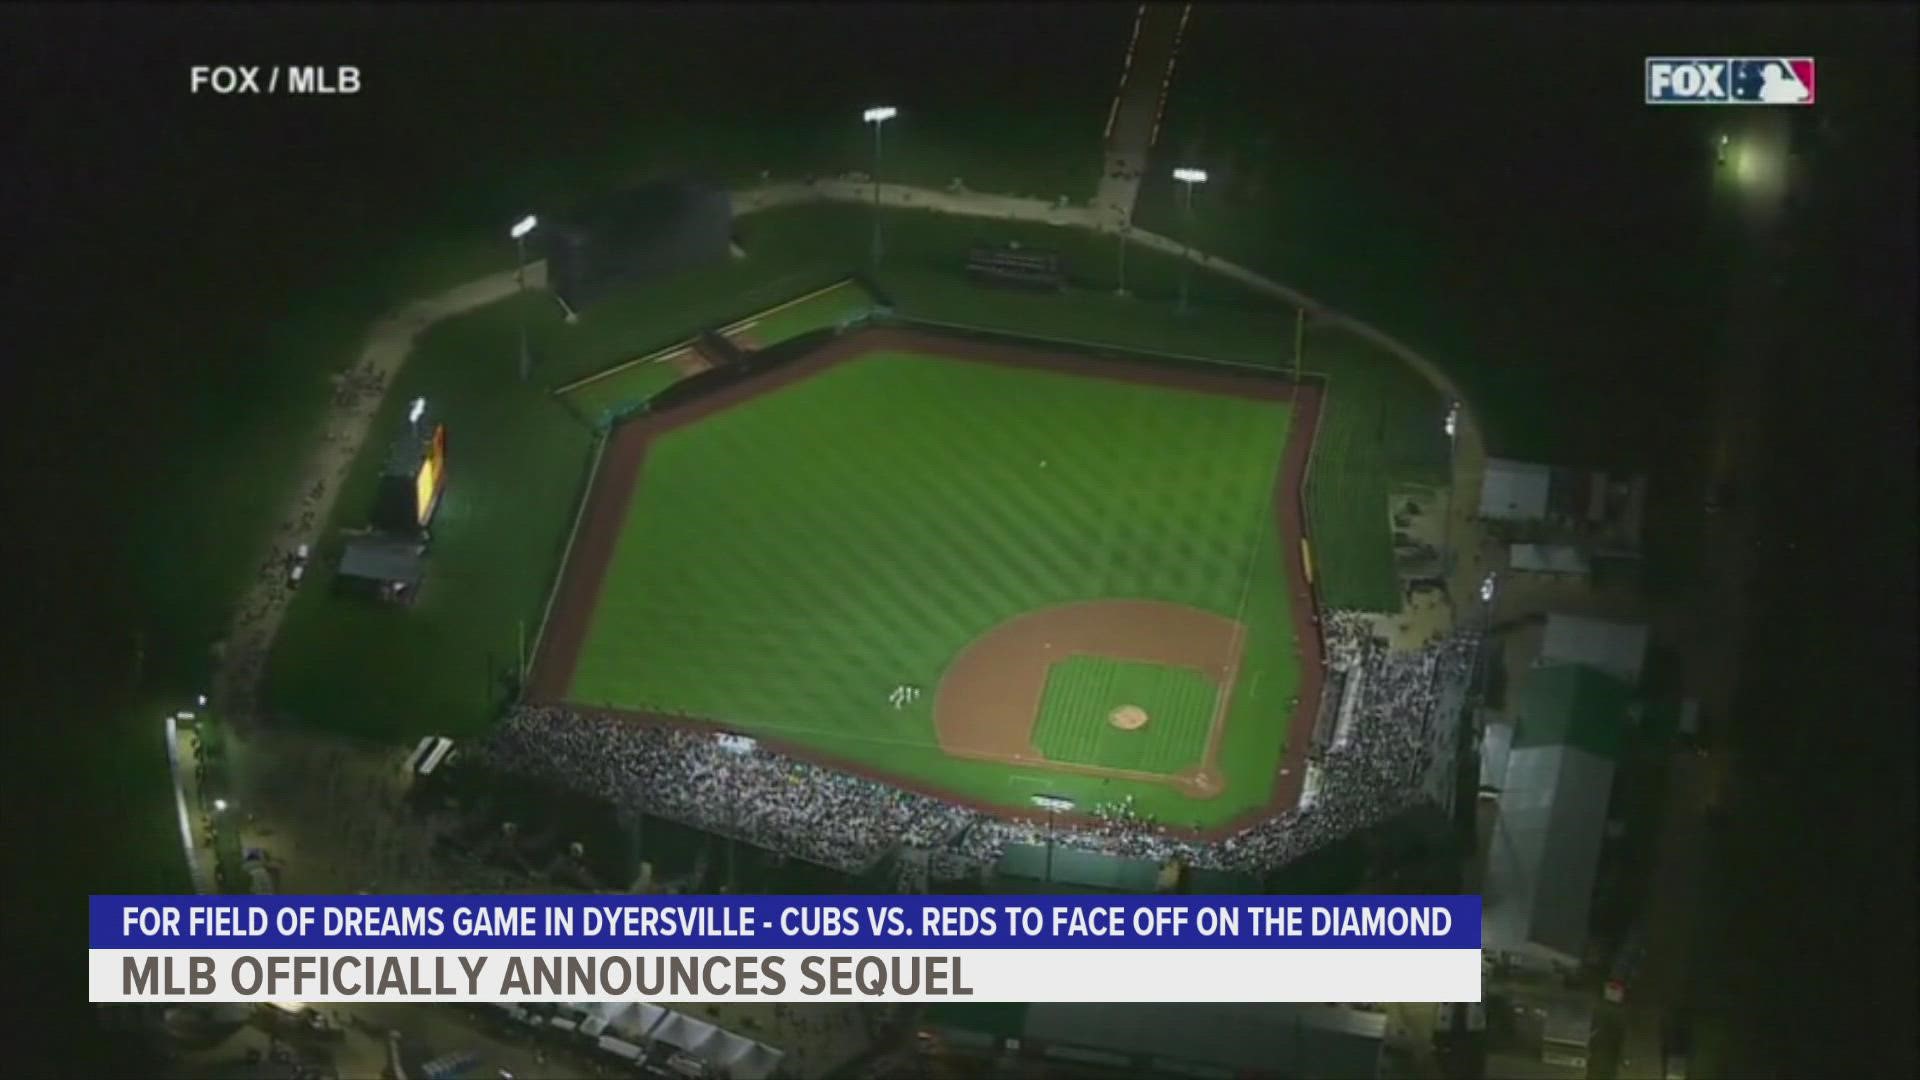 The Chicago Cubs and Cincinnati Reds are set for an Aug. 11, 2022 matchup in Dyersville.